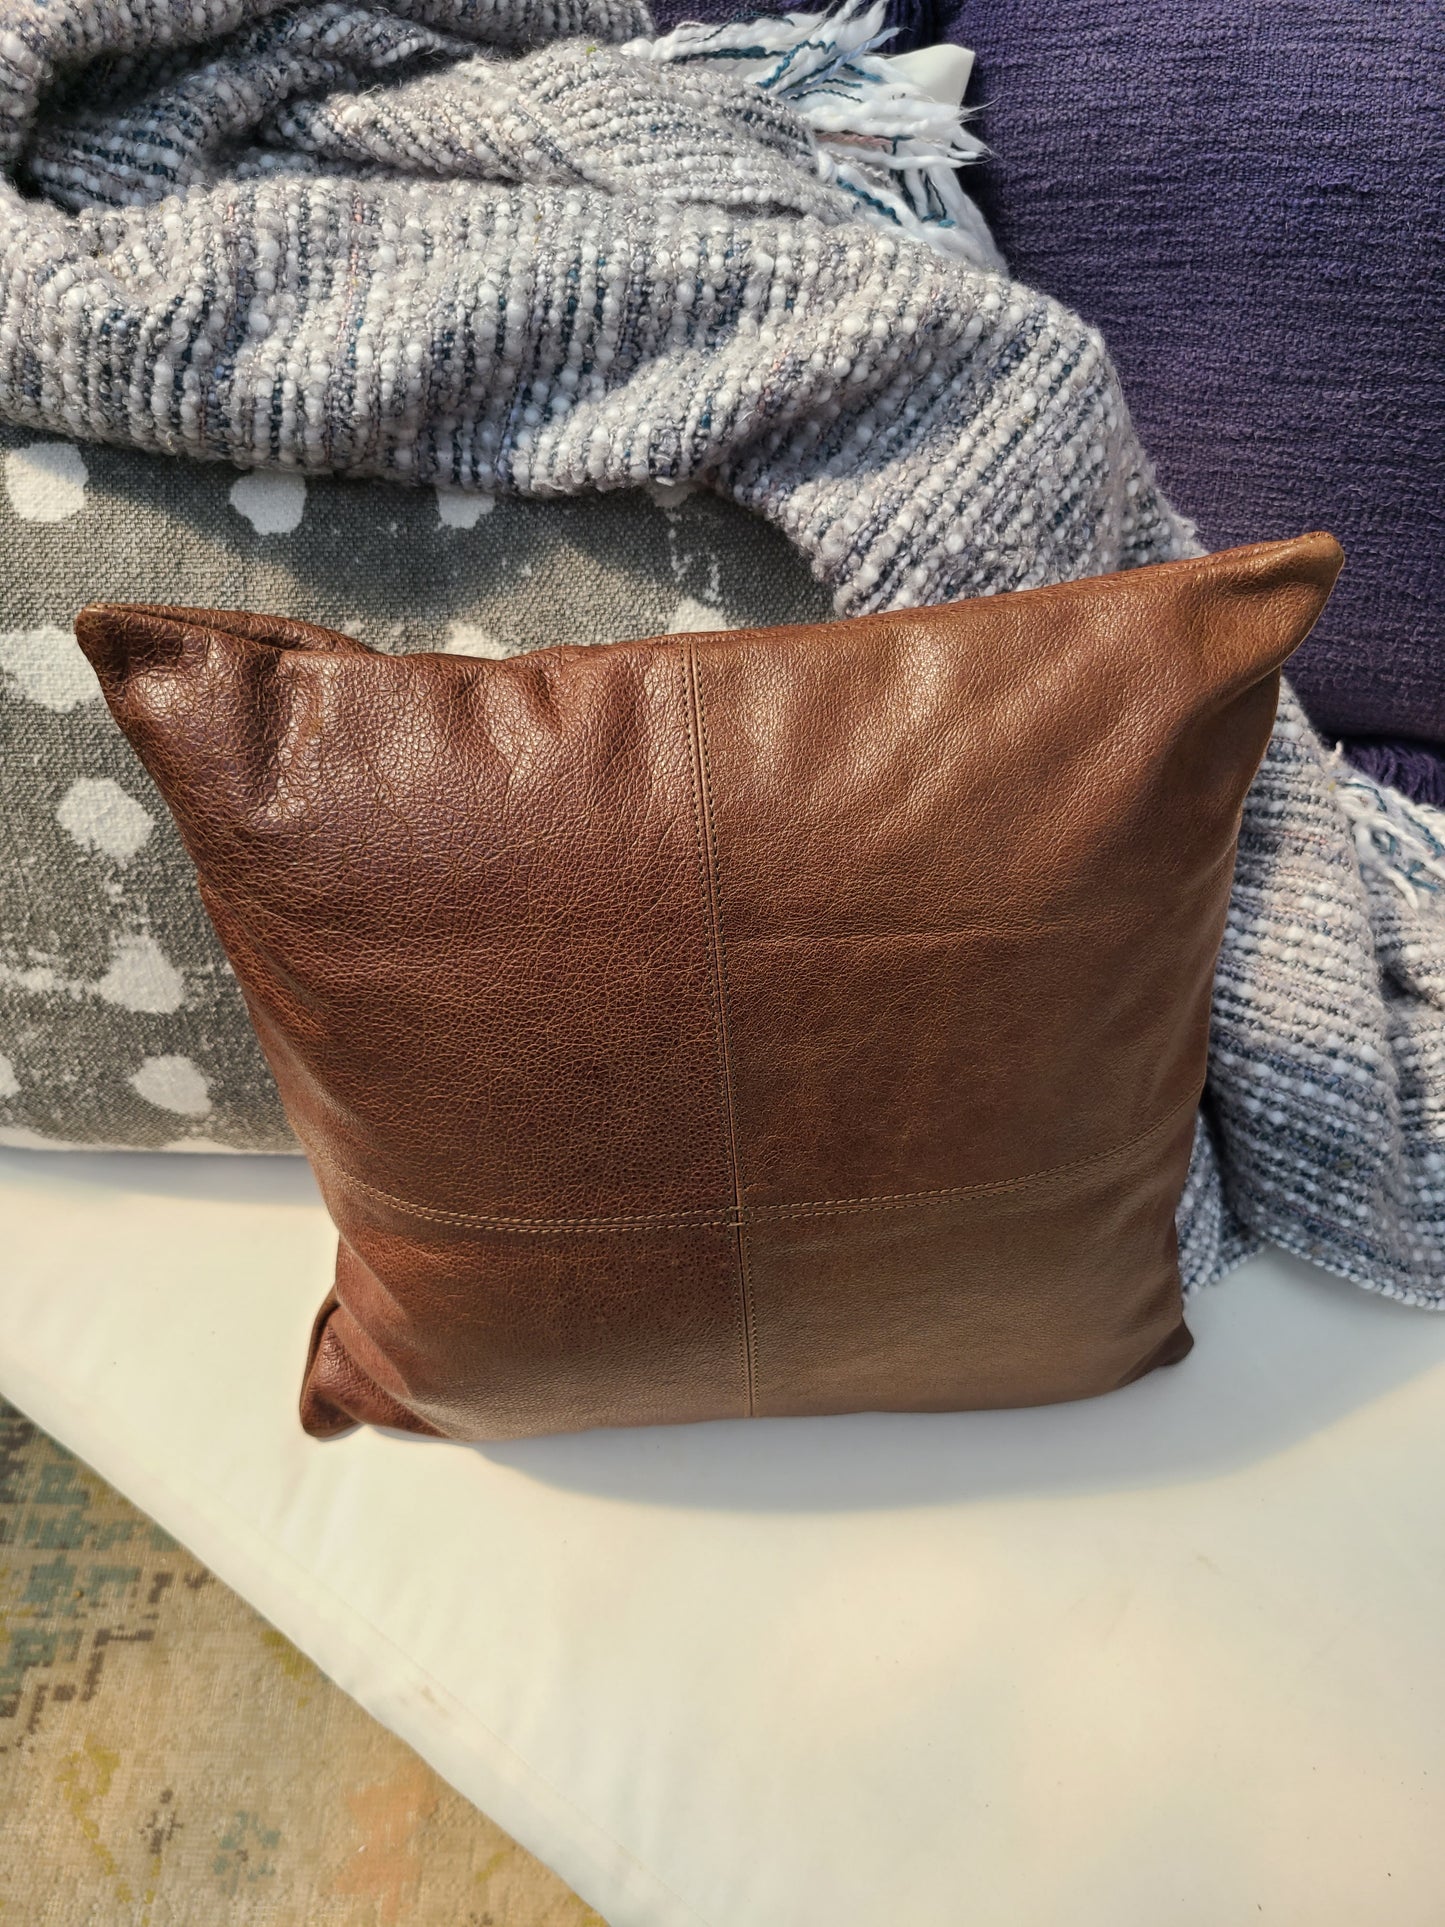 100% Leather Coffee Brown Throw Pillow Cover - 16 x 16-Status Co. Leather Studio